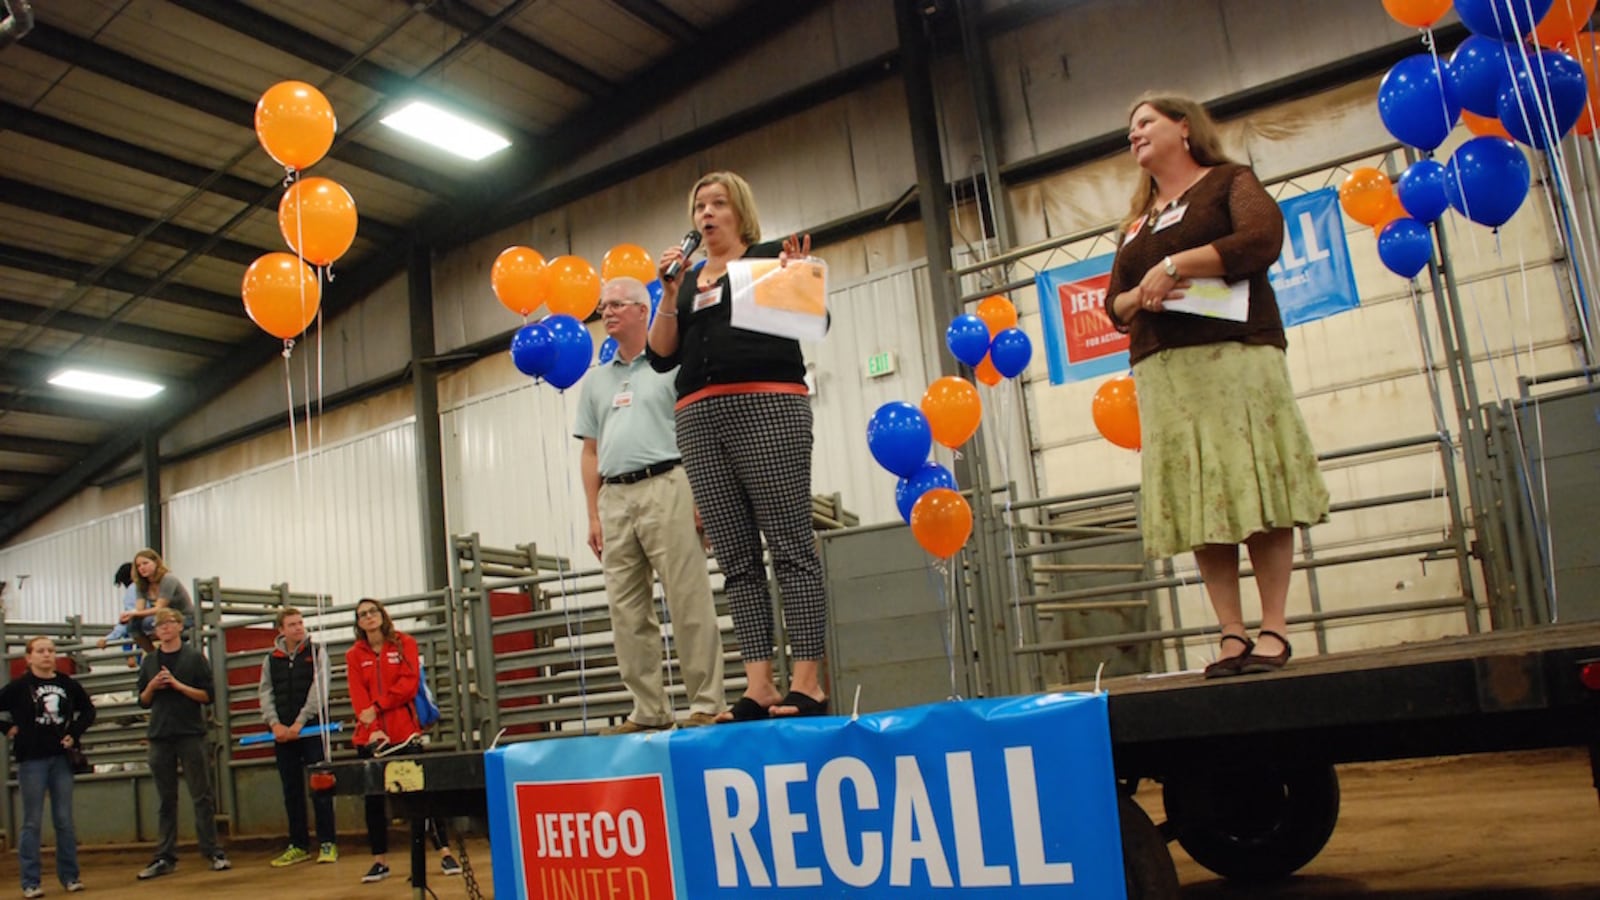 Organizers of a school board recall effort in Jefferson County, from left, Michael Blanton, Wendy McCord, and Tina Gurdikian, spoke at the campaign kick off event in July.